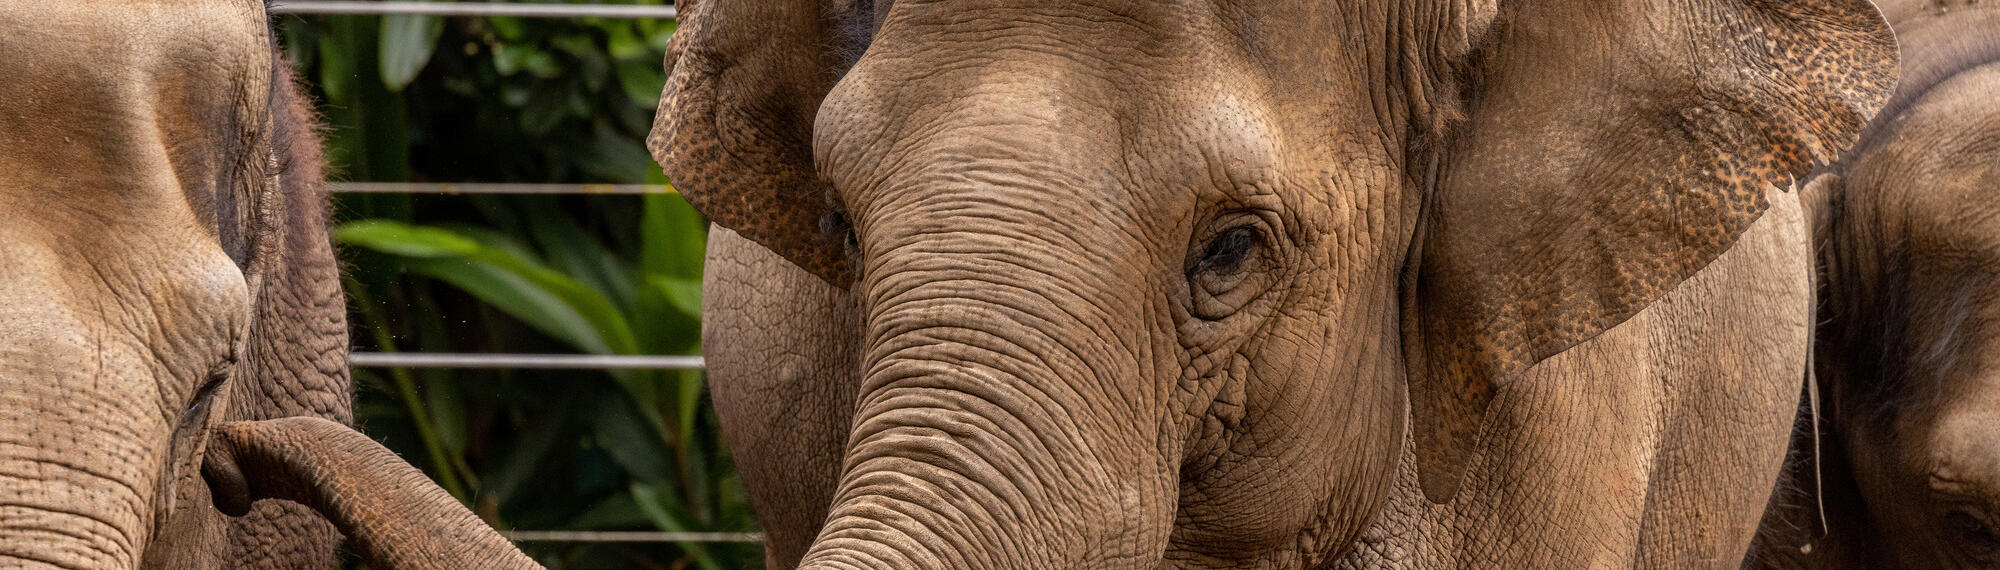  Female Asian Elephant with her trunk raised to the eye of another elephant